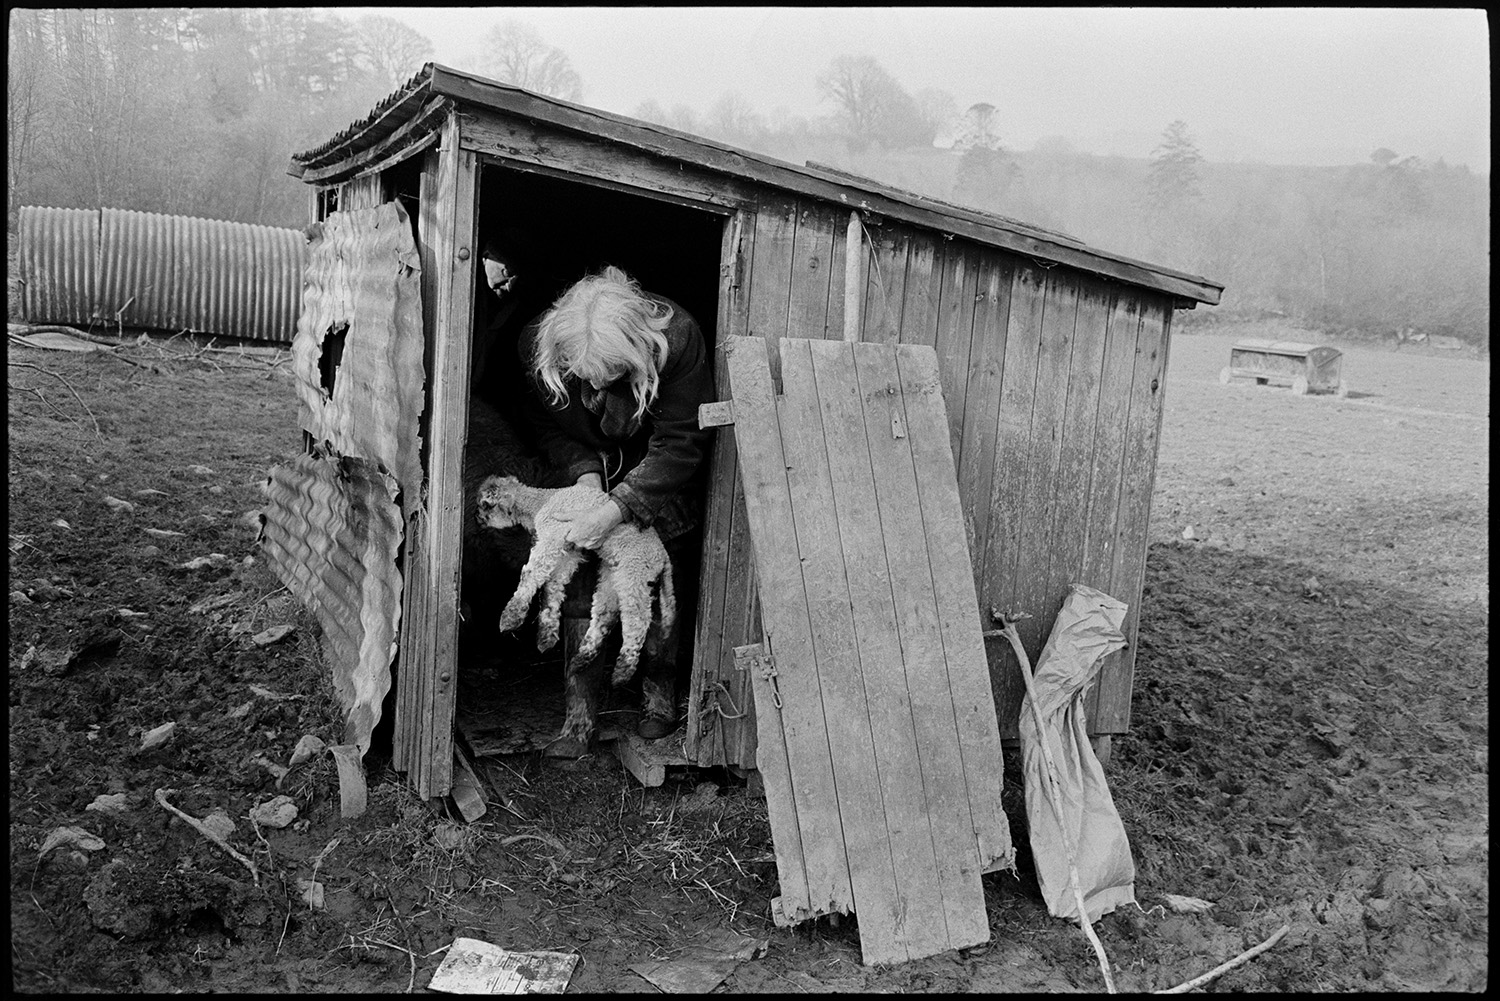 Farmers trying to make lamb take to ewe in shed. 
[Jo Curzon holding a lamb and walking out of a wooden and corrugated iron shed, in a field at Millhams, Dolton. Another corrugated iron shed and a hay feeder can be seen in the background.]